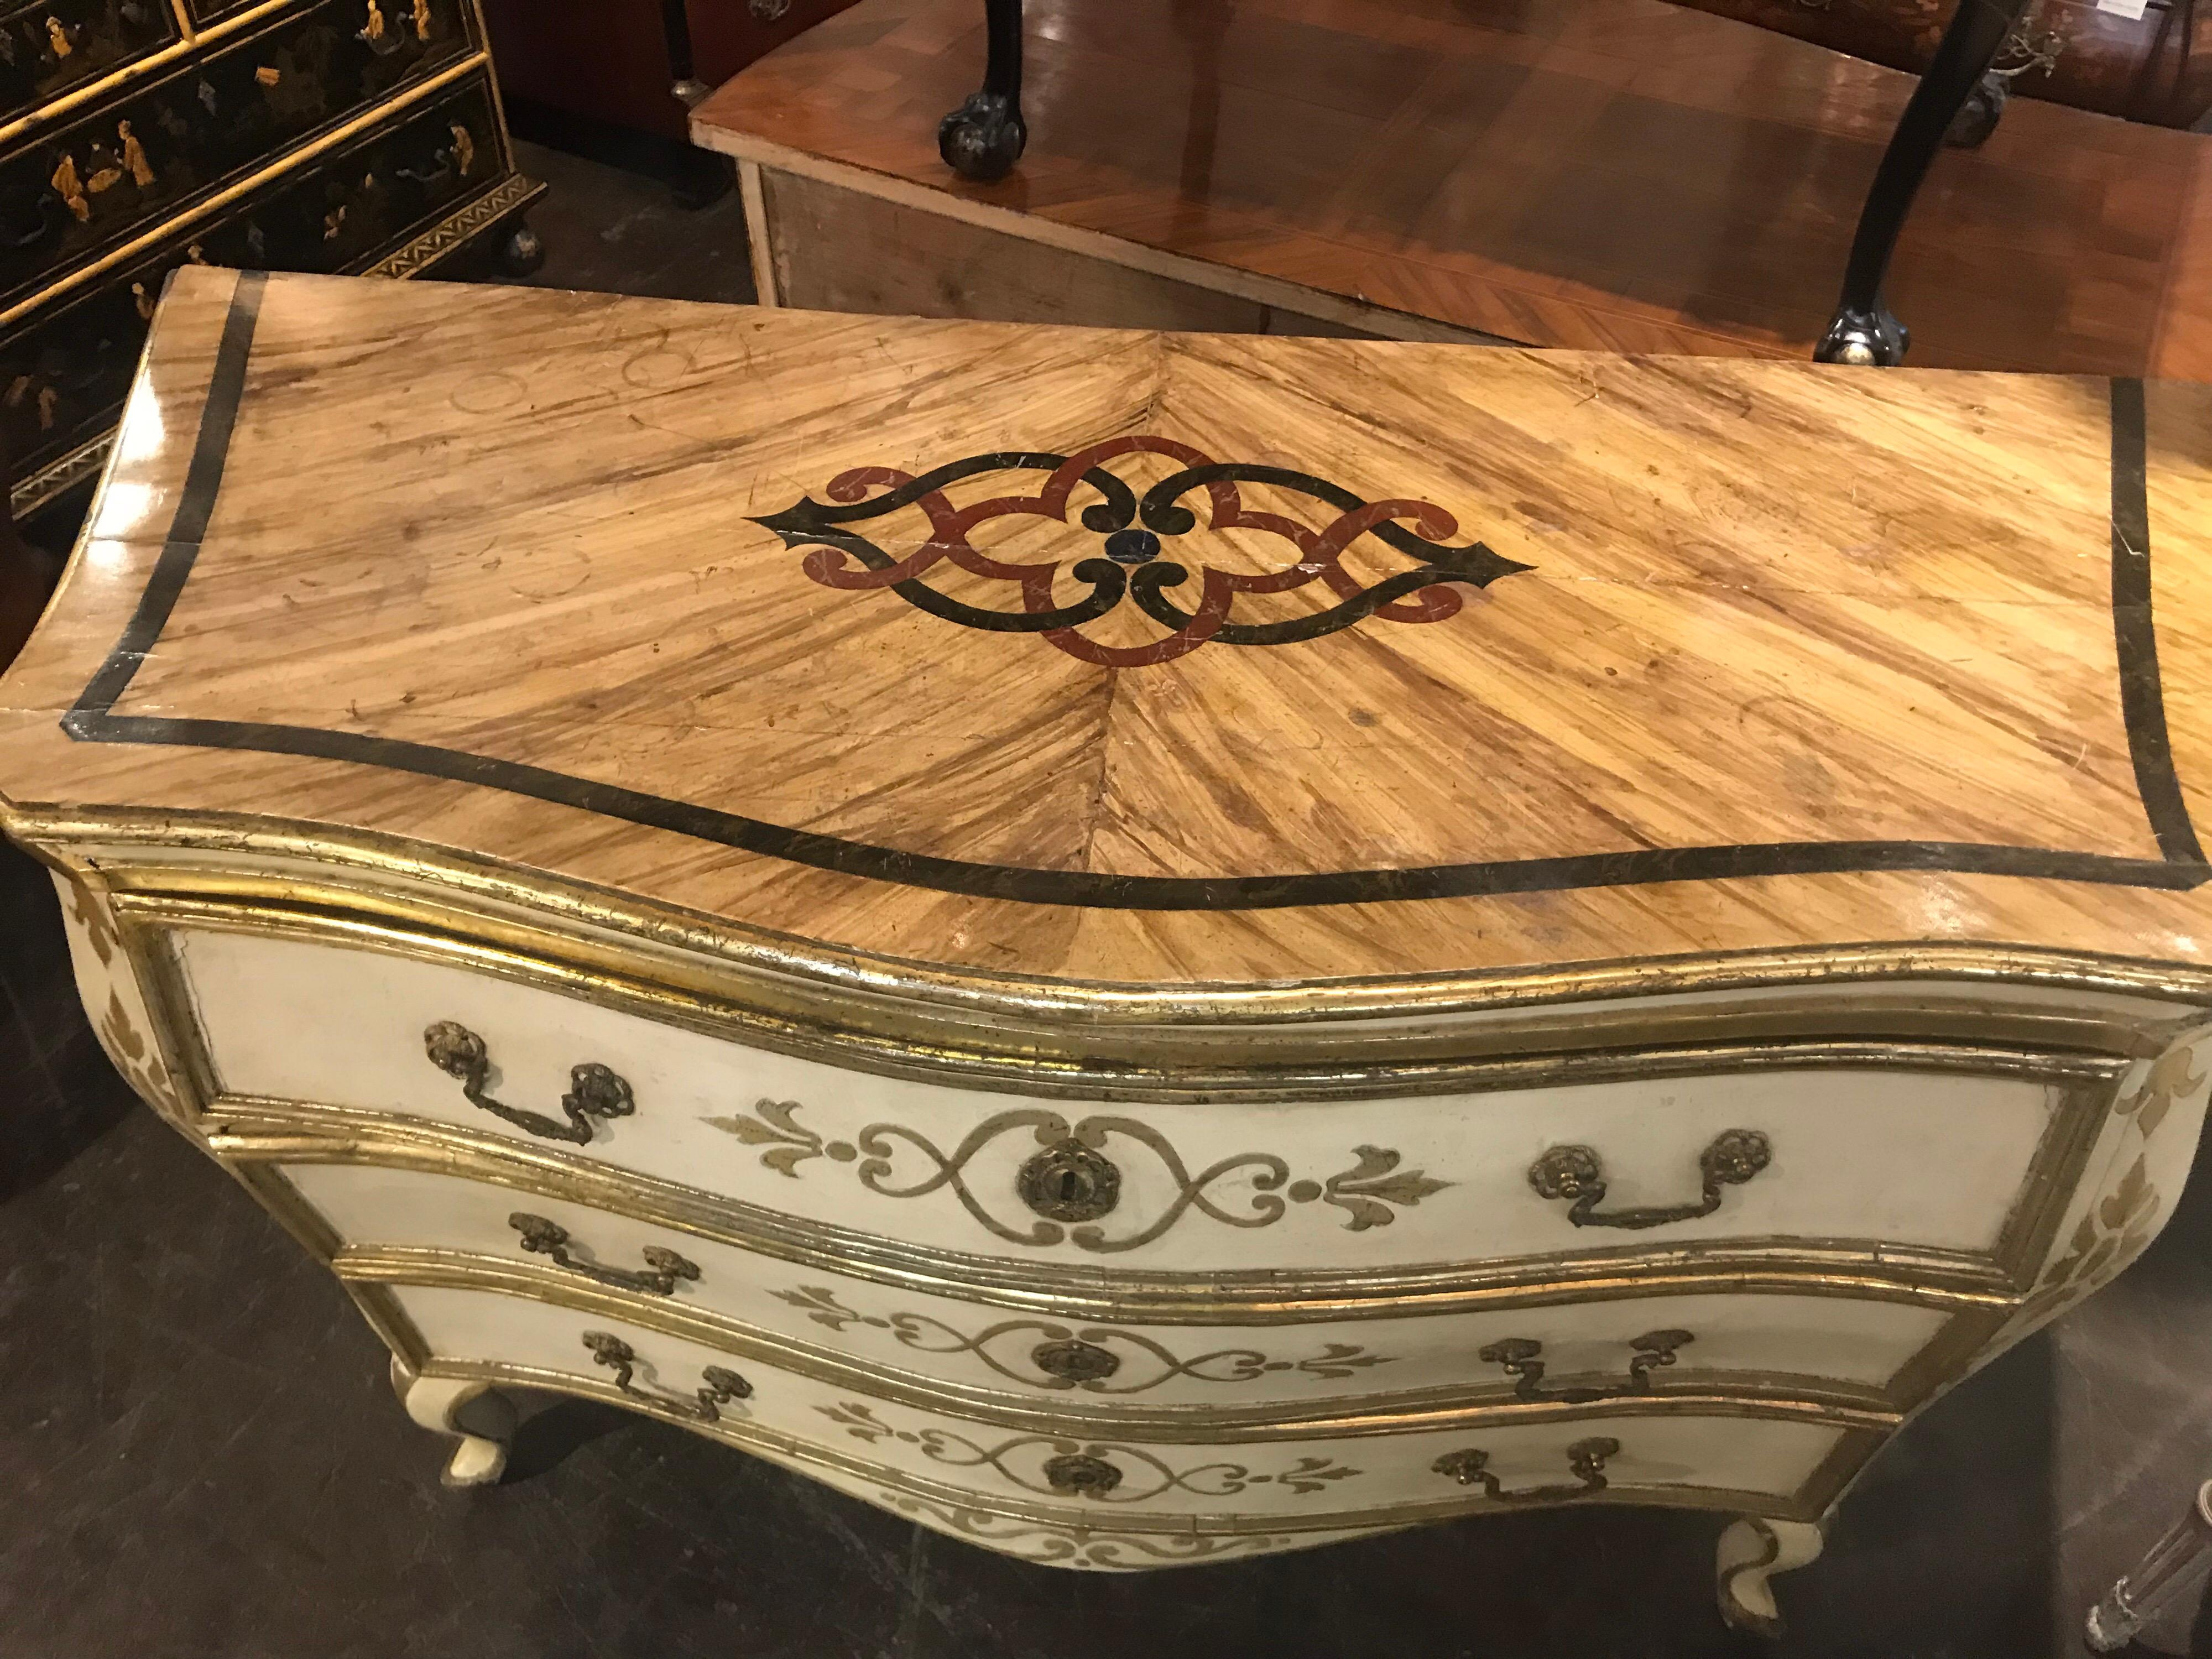 Beautiful 18th century Italian commode having a wonderful bombe’ shape and original parcel gilt finish. Interesting warm finished walnut top with ebonized inlay gives this piece added charm. Structurally very solid and pleasing to the eye. Fabulous